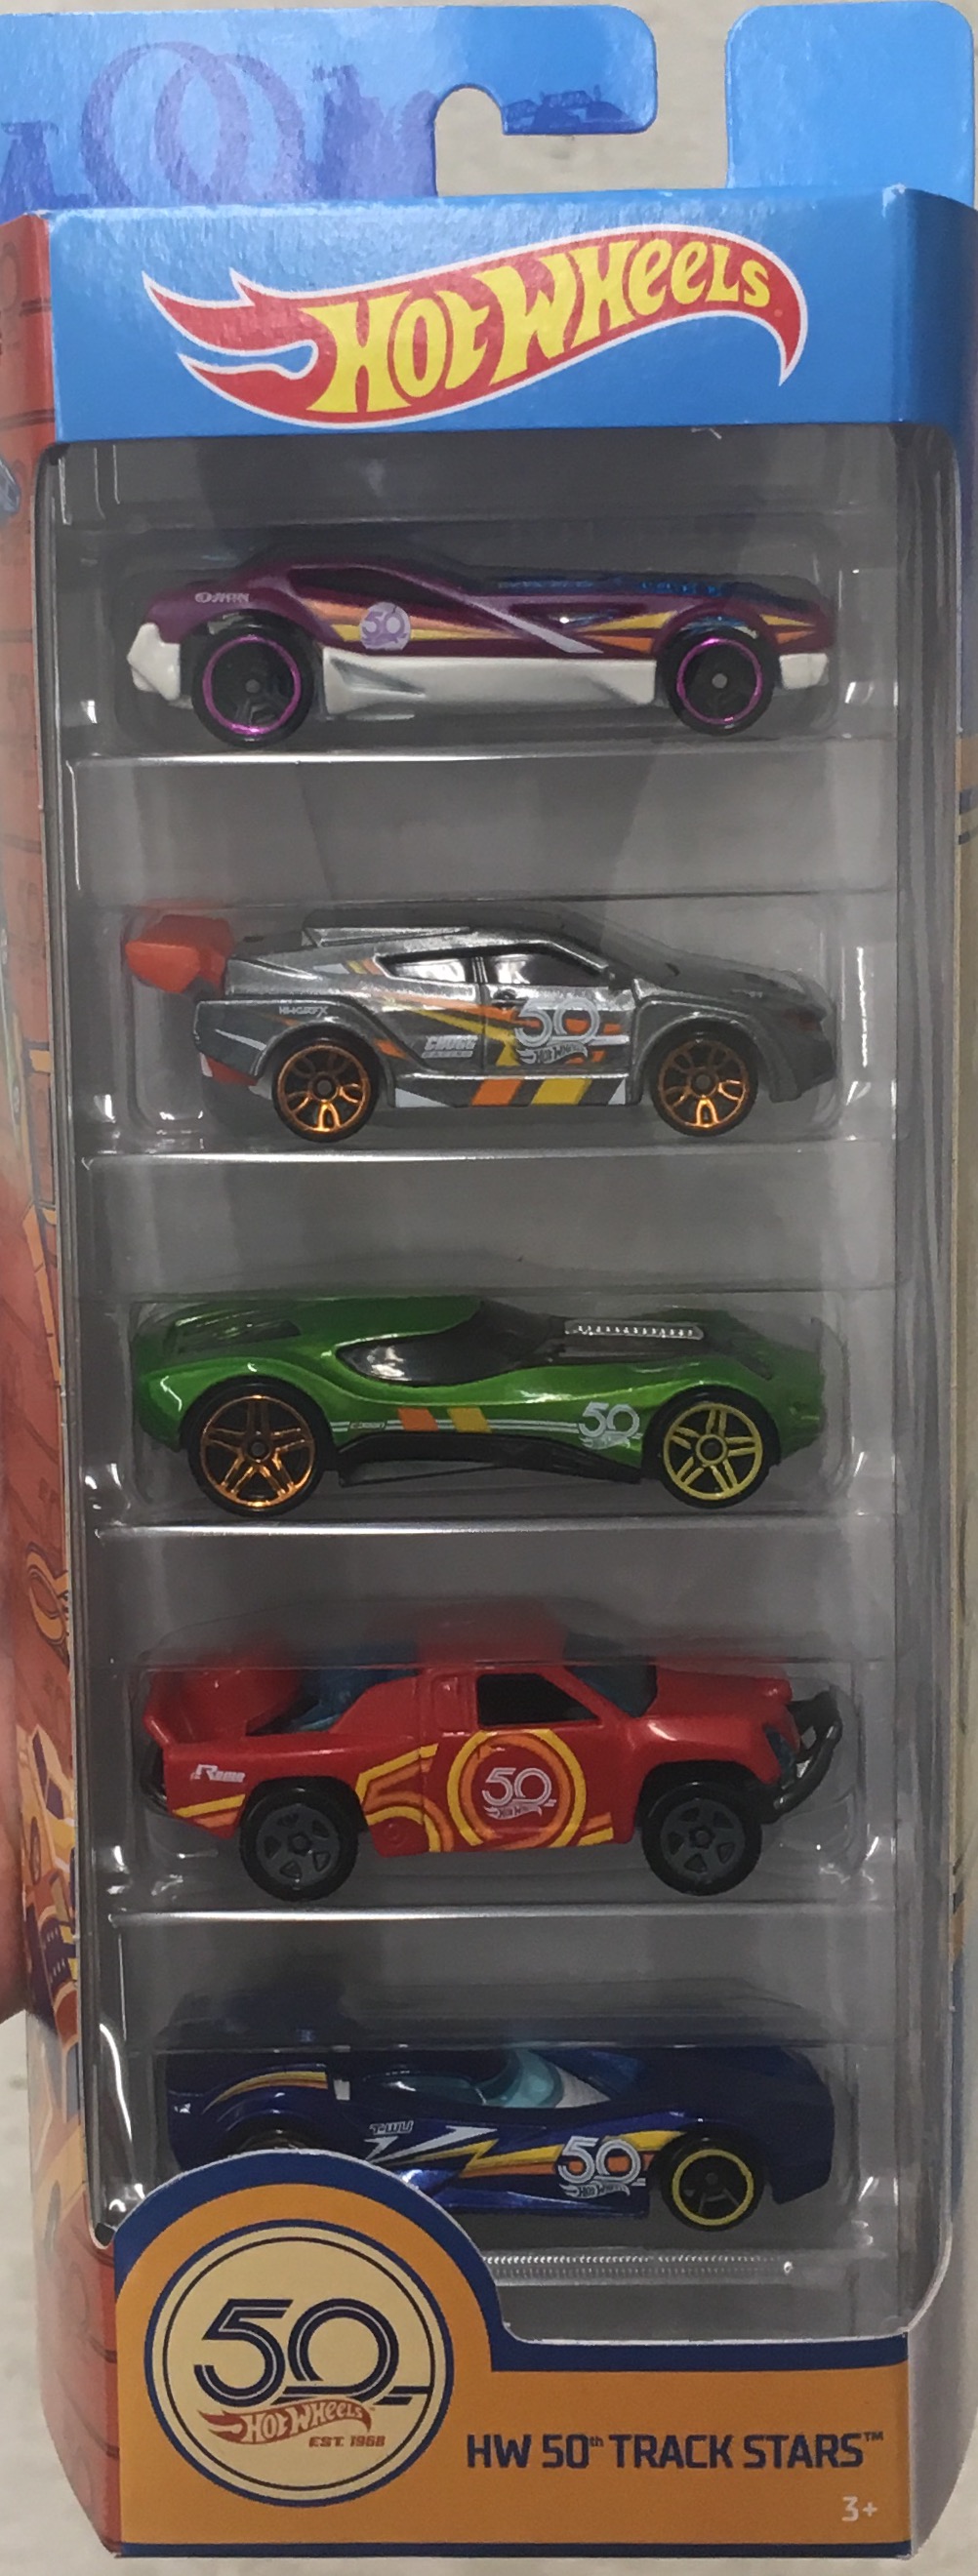 Hot Wheels 2018 HW 50th Anniversary Track Stars 5-pack Diecasts for sale online 